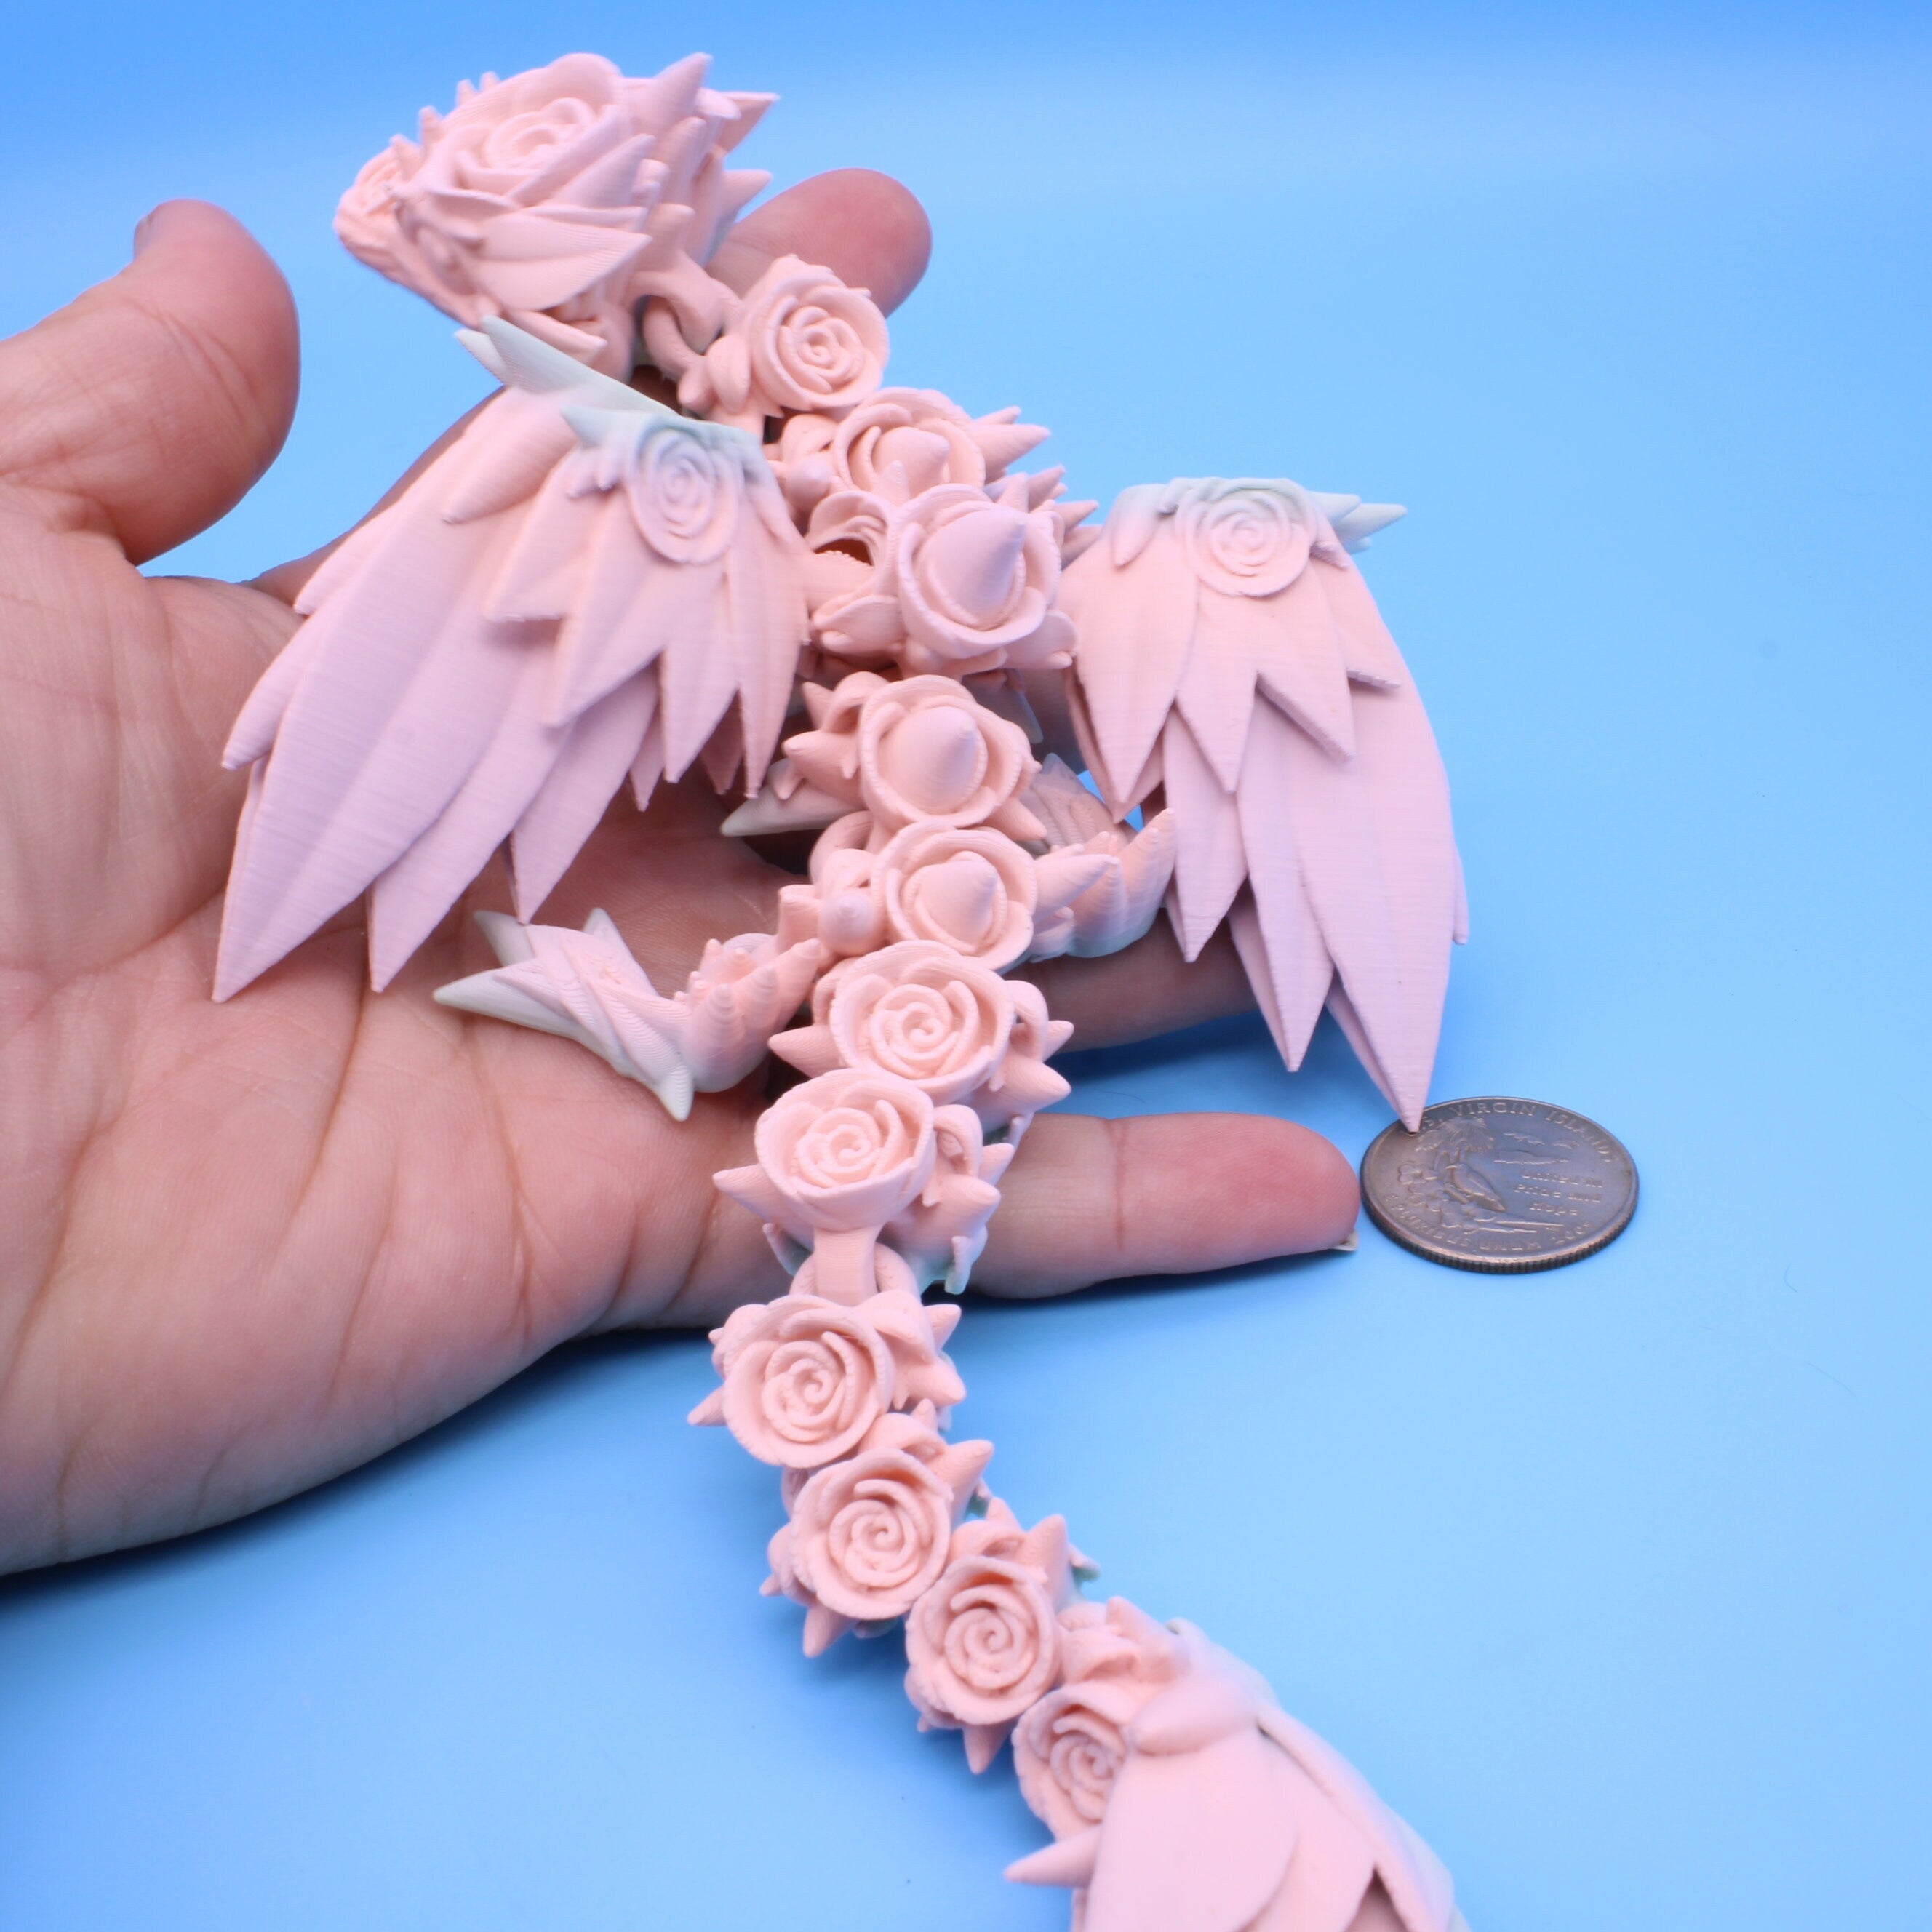 Baby Rose Wing Dragon | 3D Printed | Flexi Toy 8.5 in.